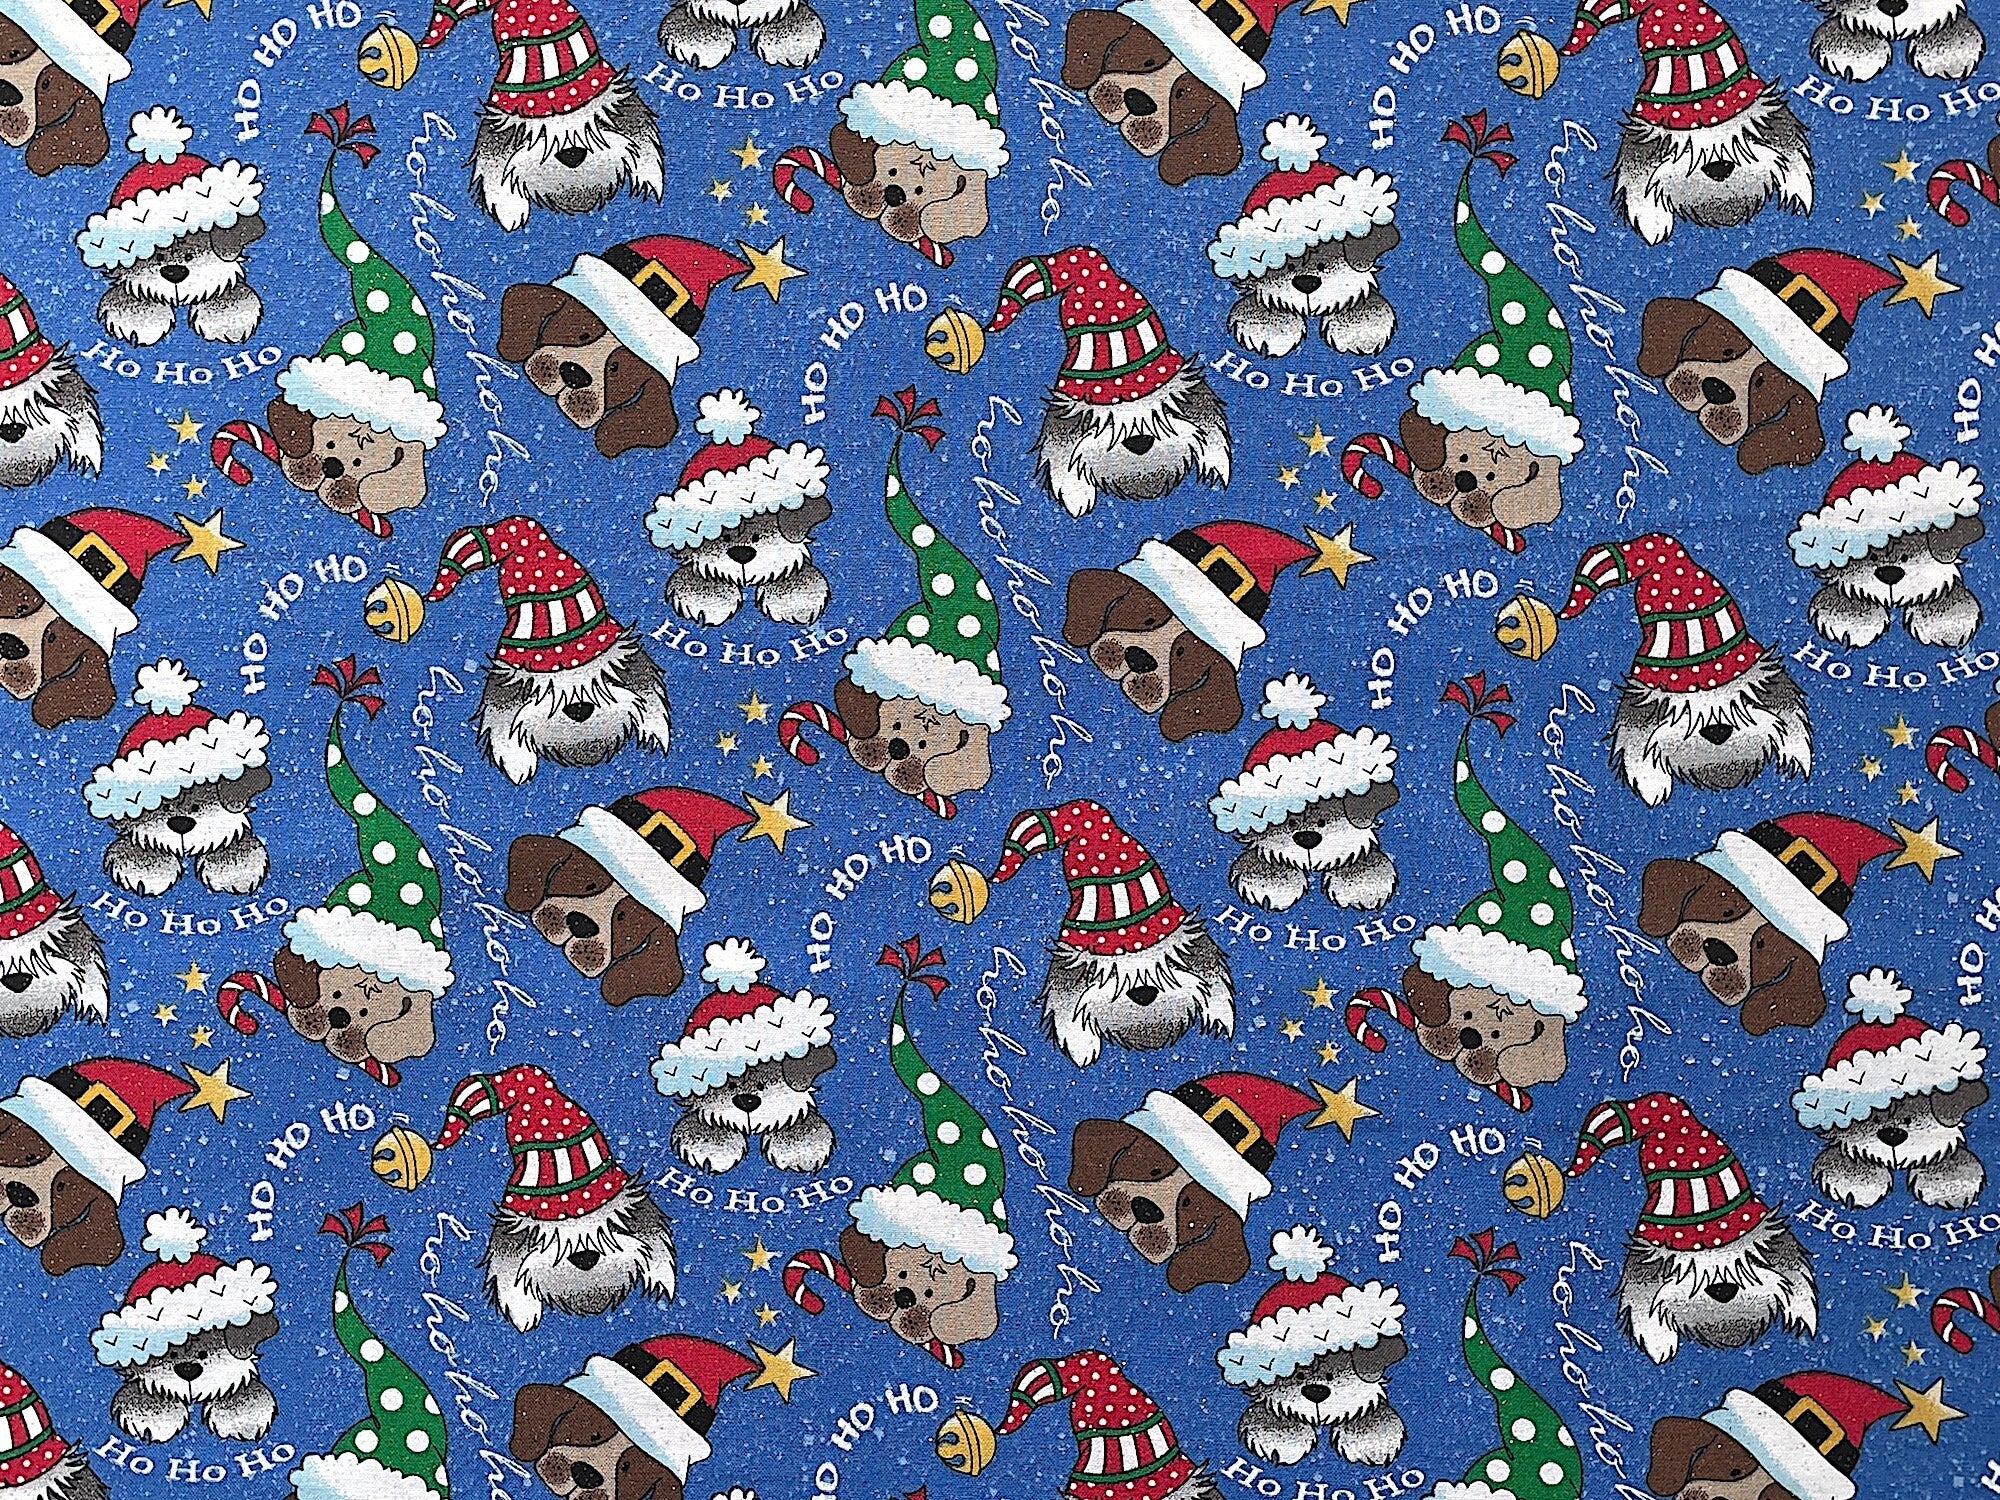 This fabric is called Ho Ho Pups glitter and is covered with dogs wearing Christmas hats. The blue background also has bells and the words Ho Ho Ho and glitter throughout.